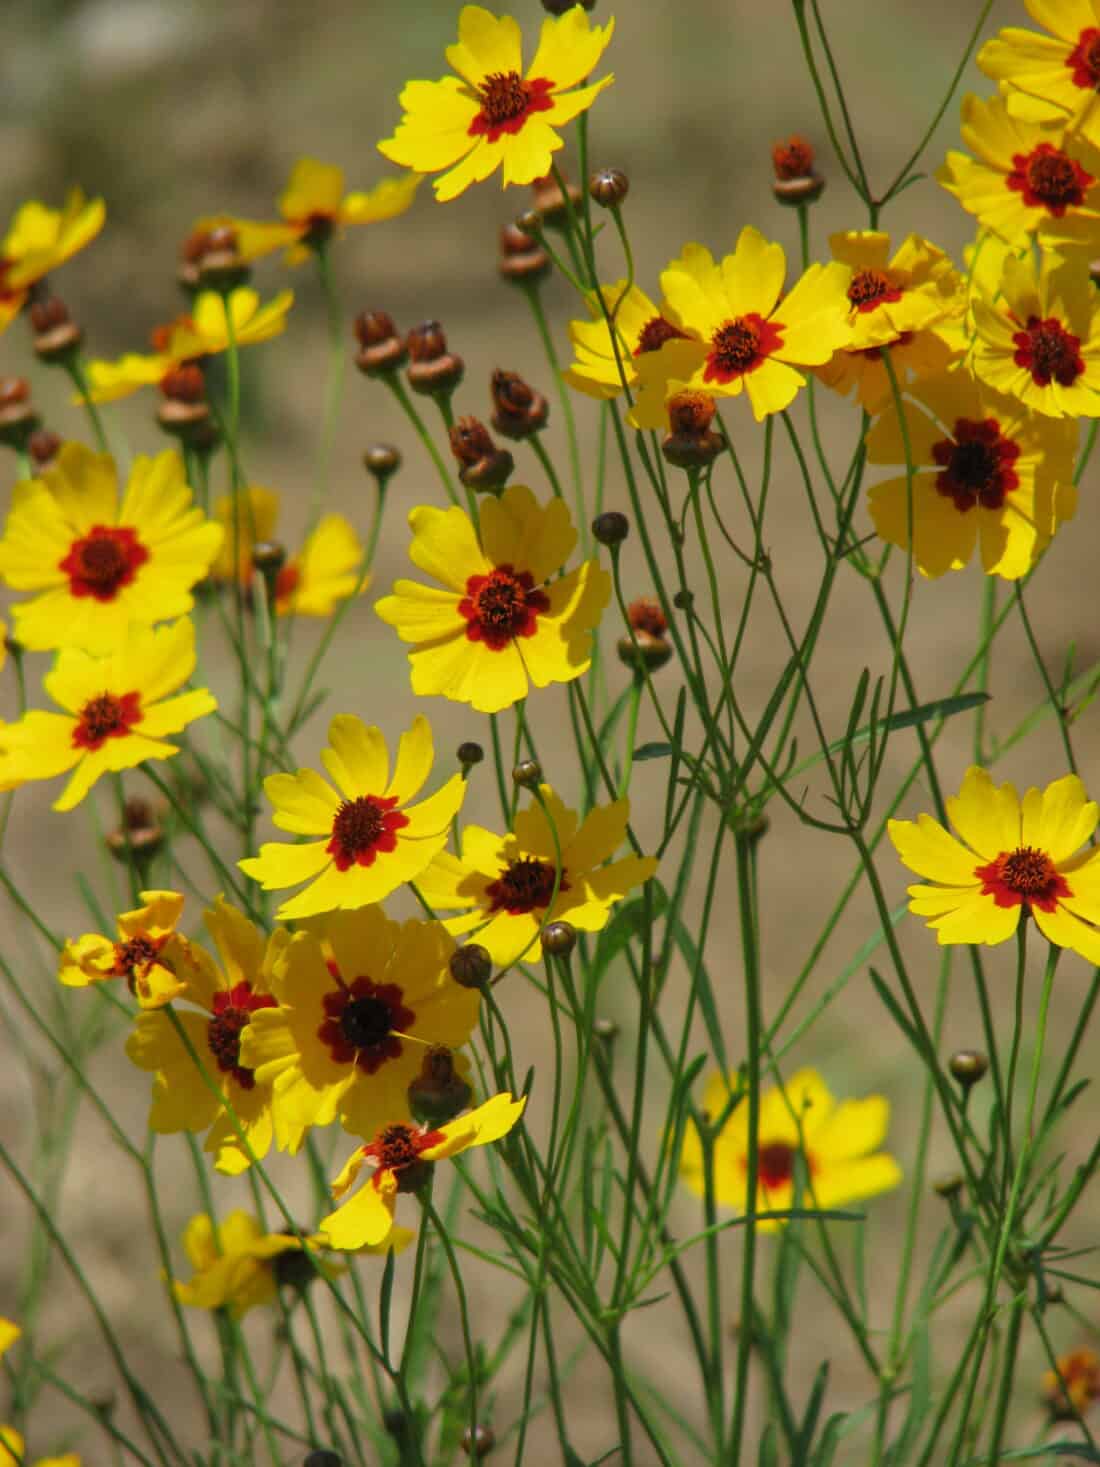 A cluster of bright yellow and orange Coreopsis flowers on thin green stems stands out brilliantly, their vibrant petals accentuating the tranquil setting perfect for garden yoga. The blurred background enhances the natural beauty of these wildflowers, making it an ideal spot for backyard yoga.